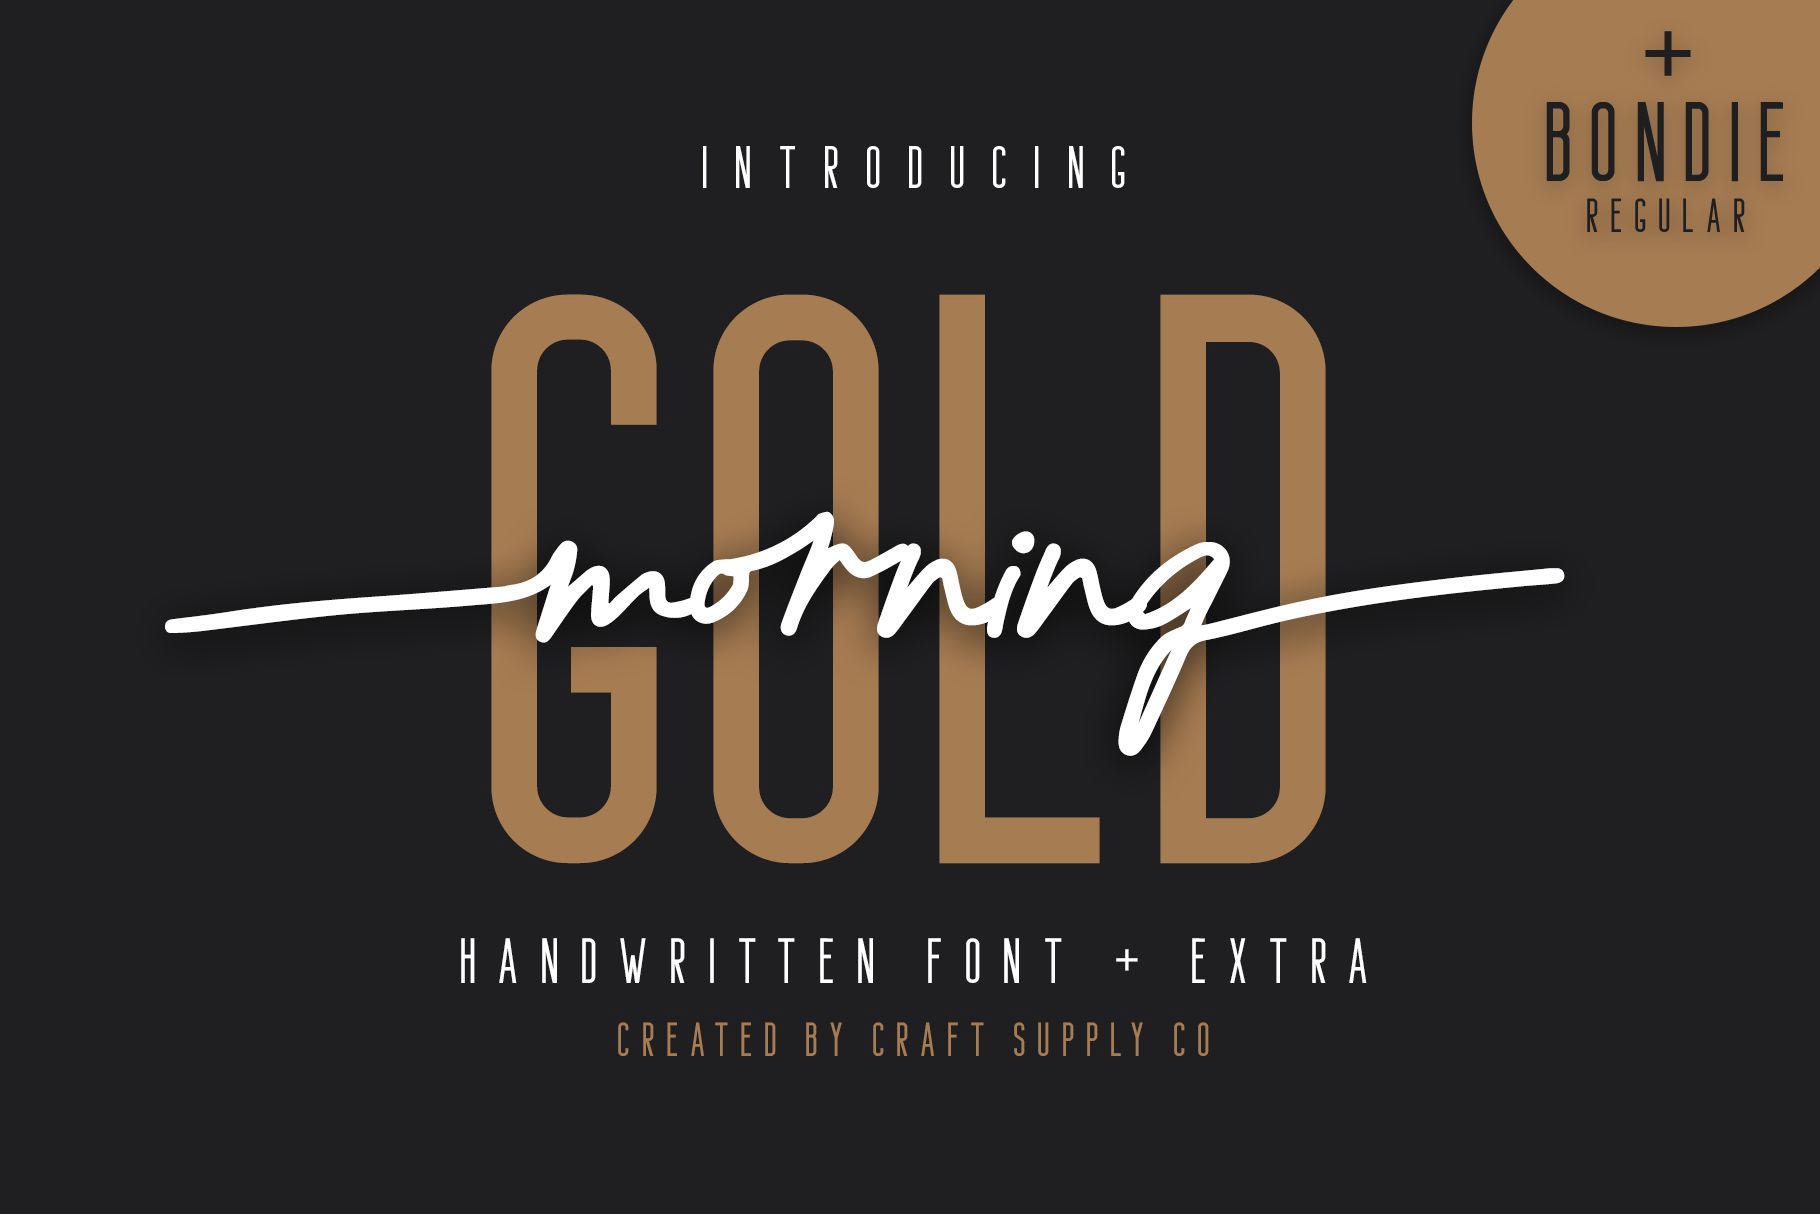 Morning Gold - Handwritten Font (Free Download) on Behance -   23 letter crafts scripts
 ideas